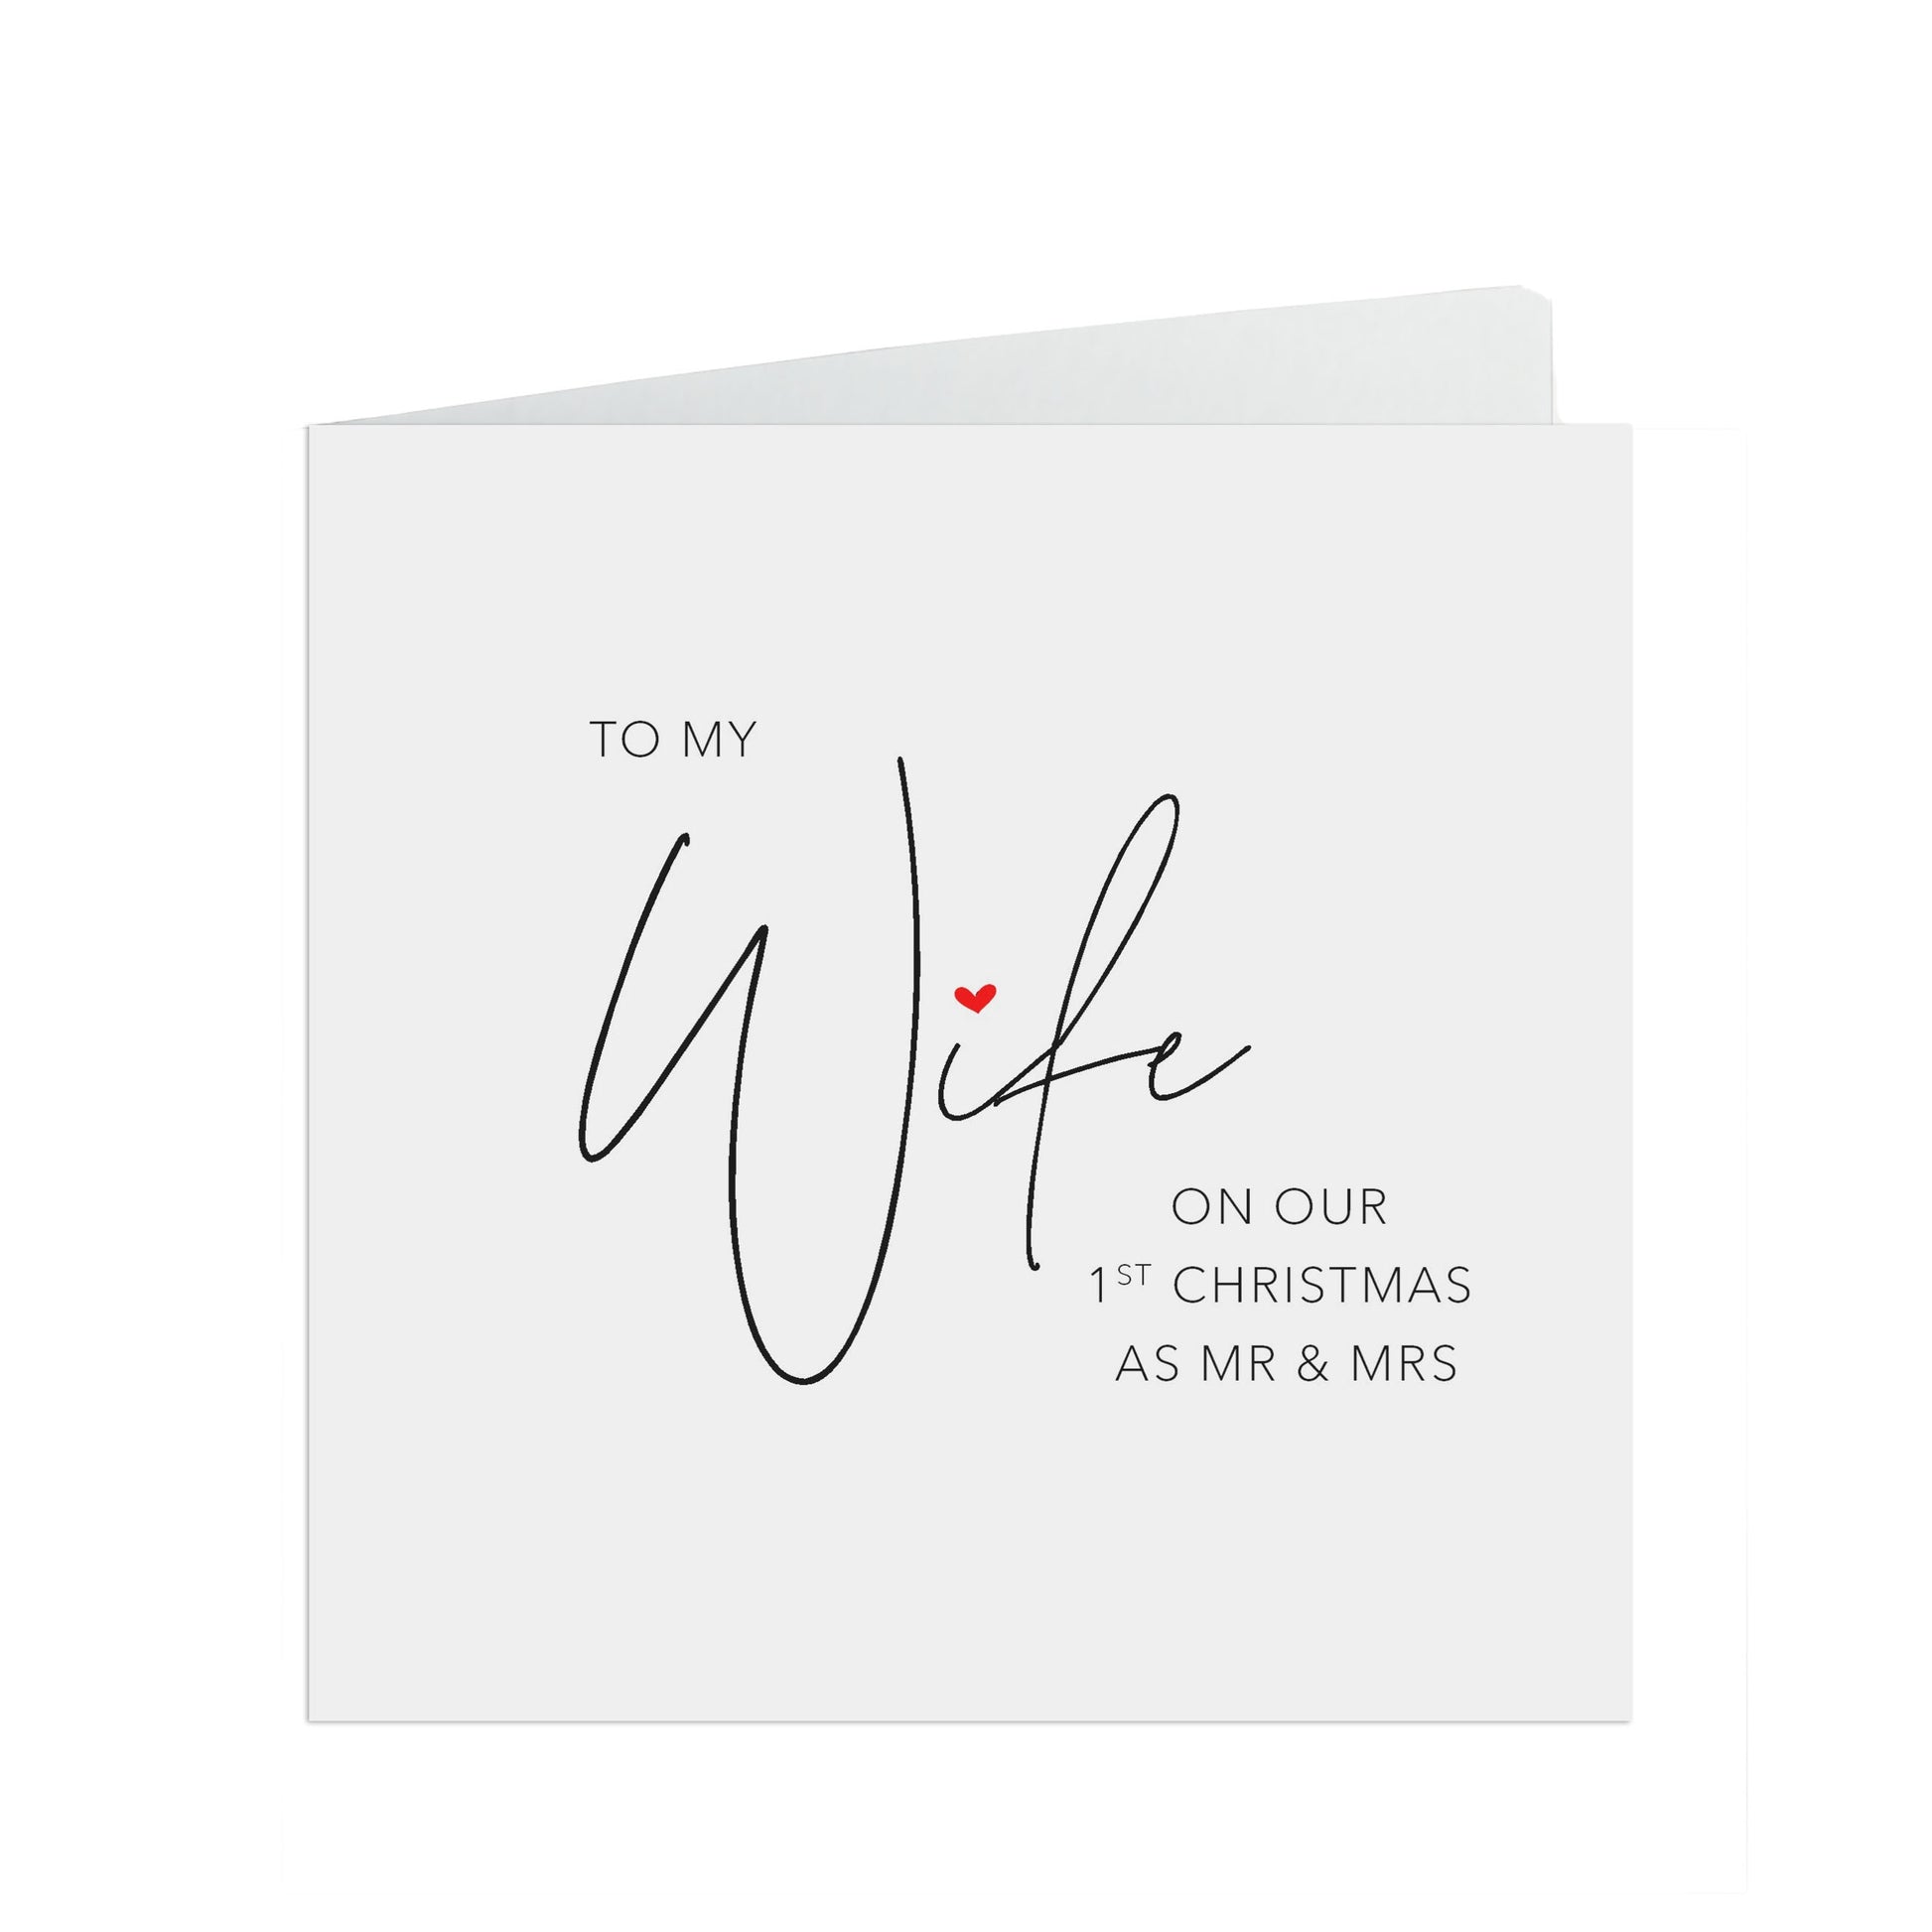 First Christmas As Mr & Mrs, Wife Simple Romantic 1st Christmas Card